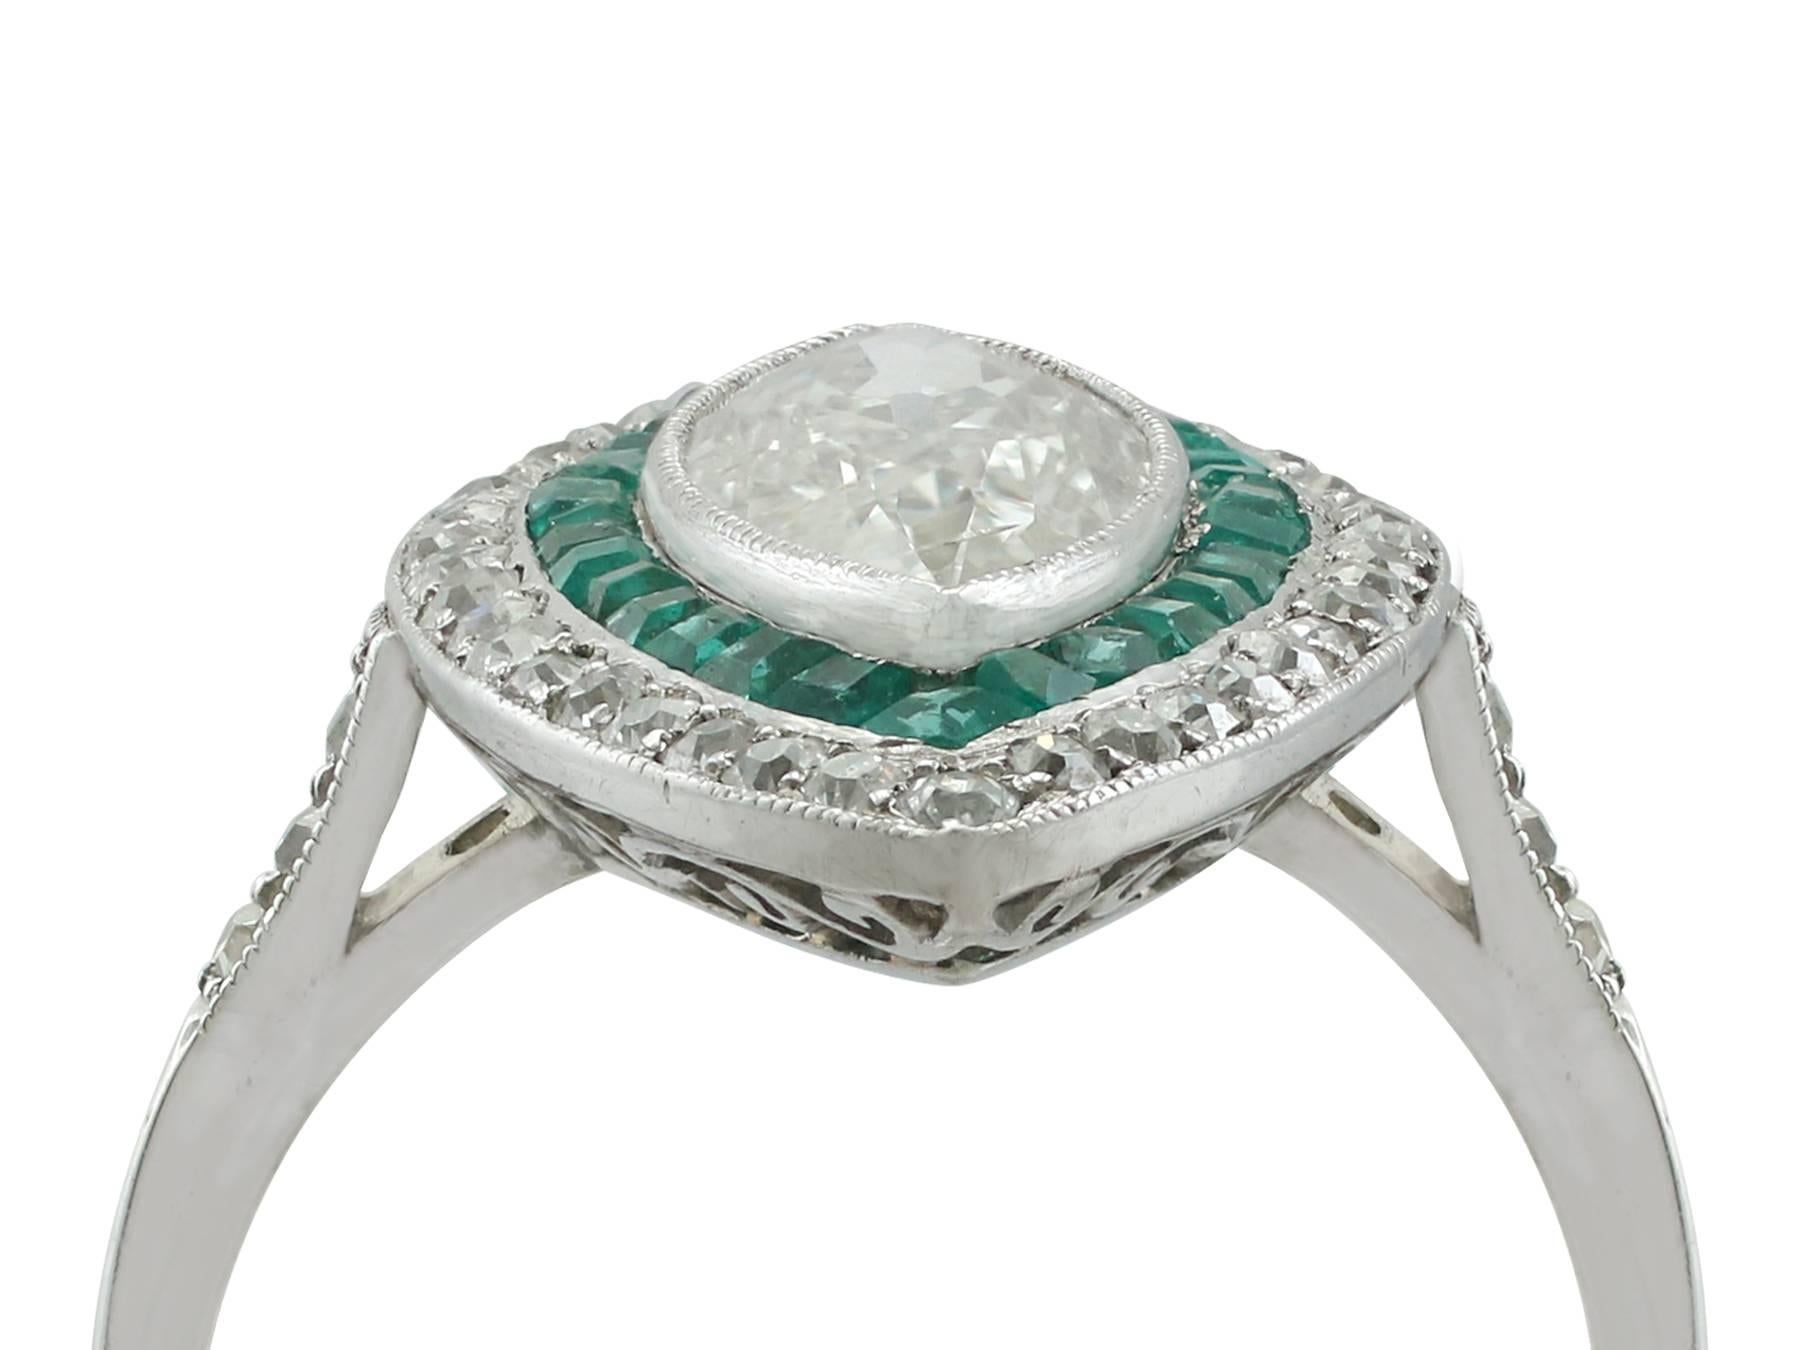 A magnificent, stunning and impressive 2.82 carat diamond and 0.86 carat emerald, 18 carat white gold marquise dress ring; part of our diverse antique jewellery collections.

This magnificent, fine and impressive large marquise diamond ring with